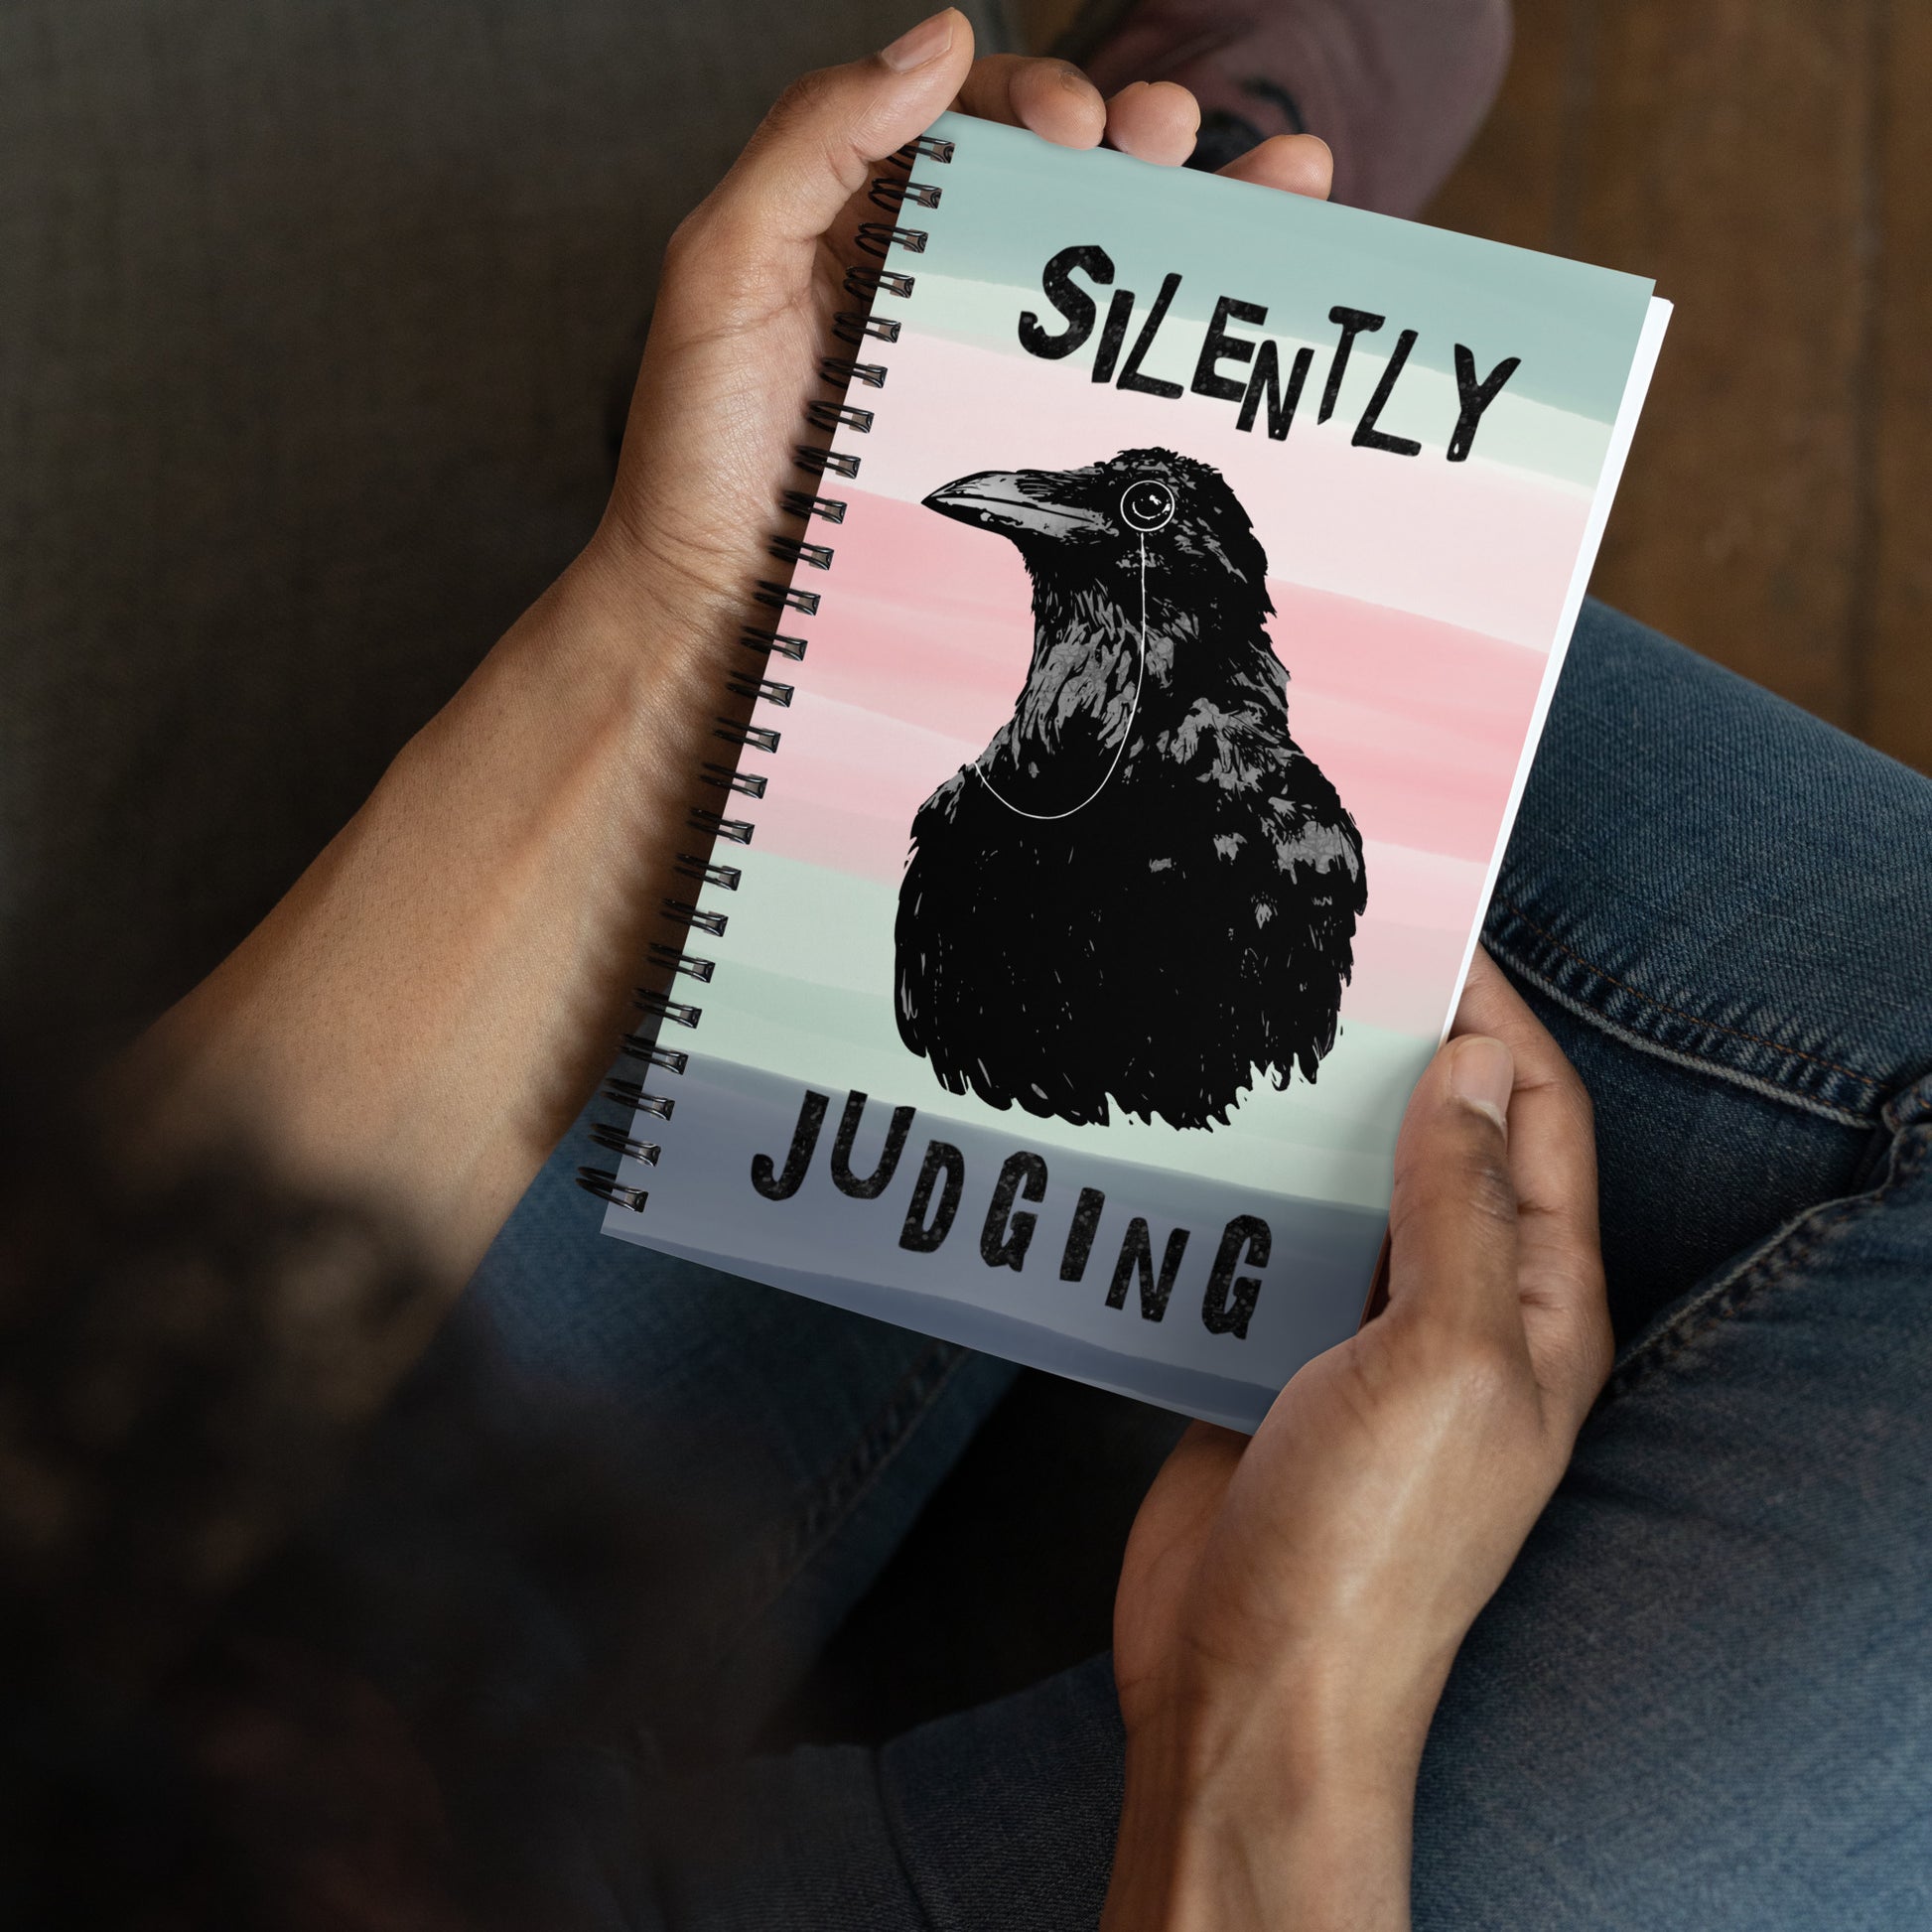 Spiral bound notebook with soft touch cover and 140 dotted pages. Cover features silently judging text and monocled crow on a striped background. Measures 5.5 inches by 8.5 inches. Shown in model's hands.